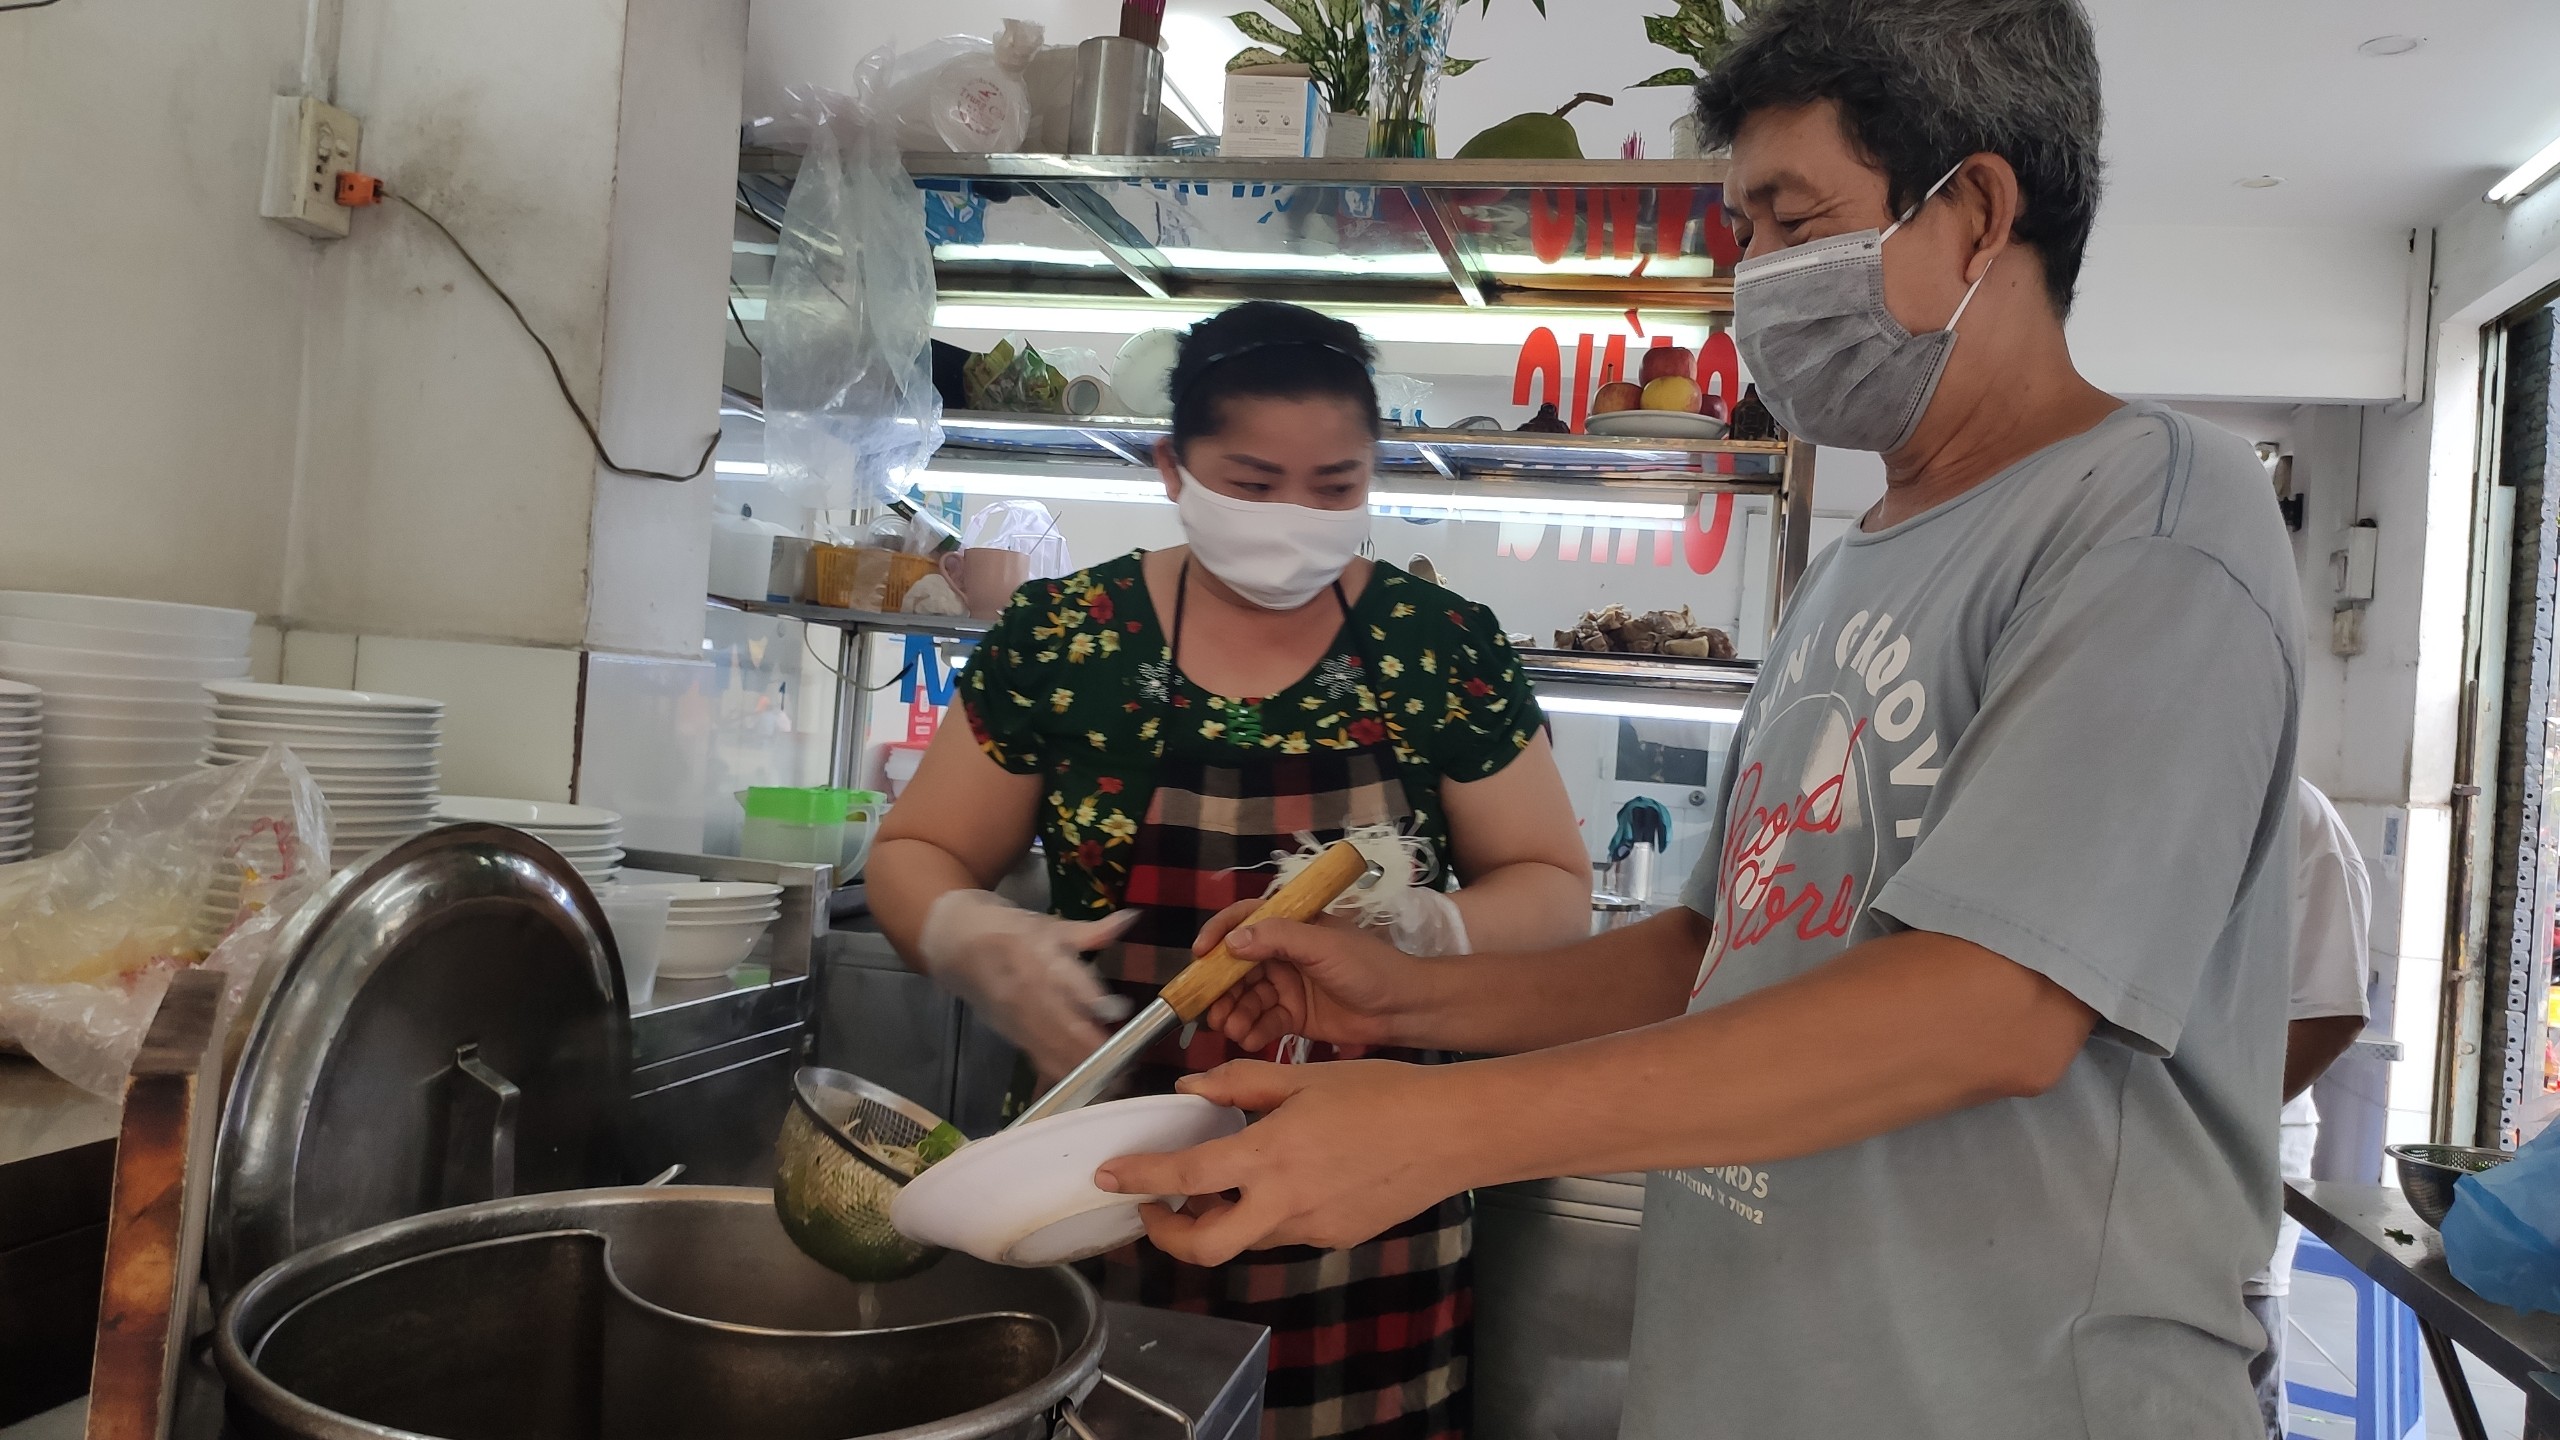 Surging cost of ingredients forces Ho Chi Minh City eatery owners to increase prices